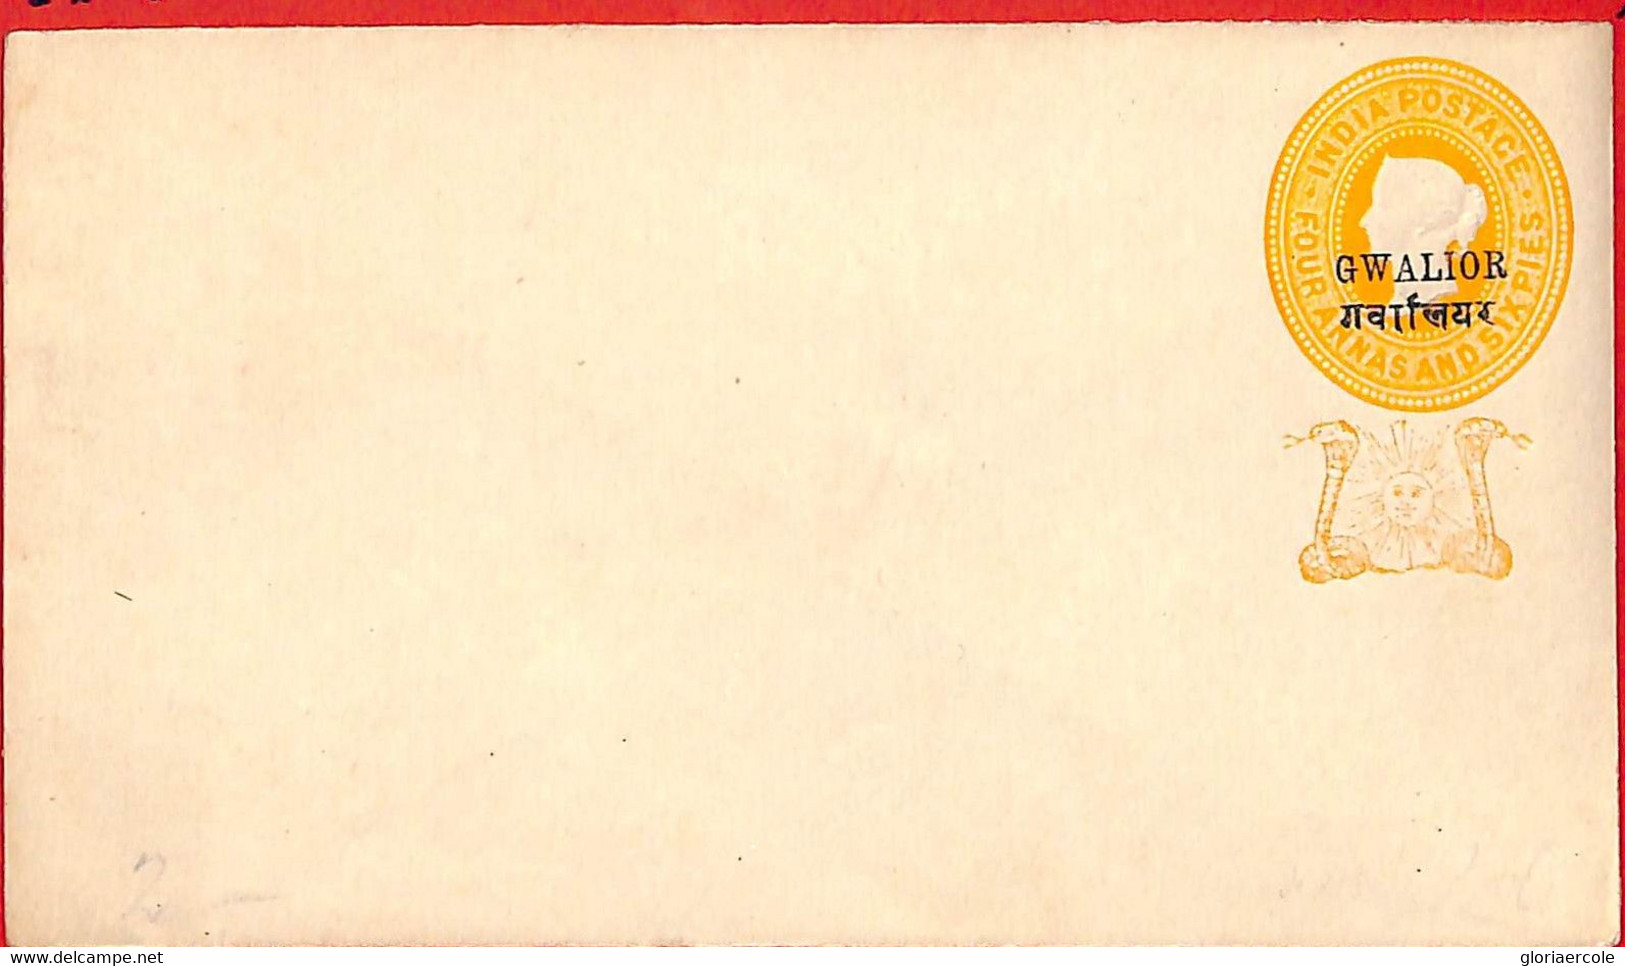 Aa2410 - INDIA  Gwalior State - Postal History - STATIONERY COVER - H & G  #  8 - Gwalior